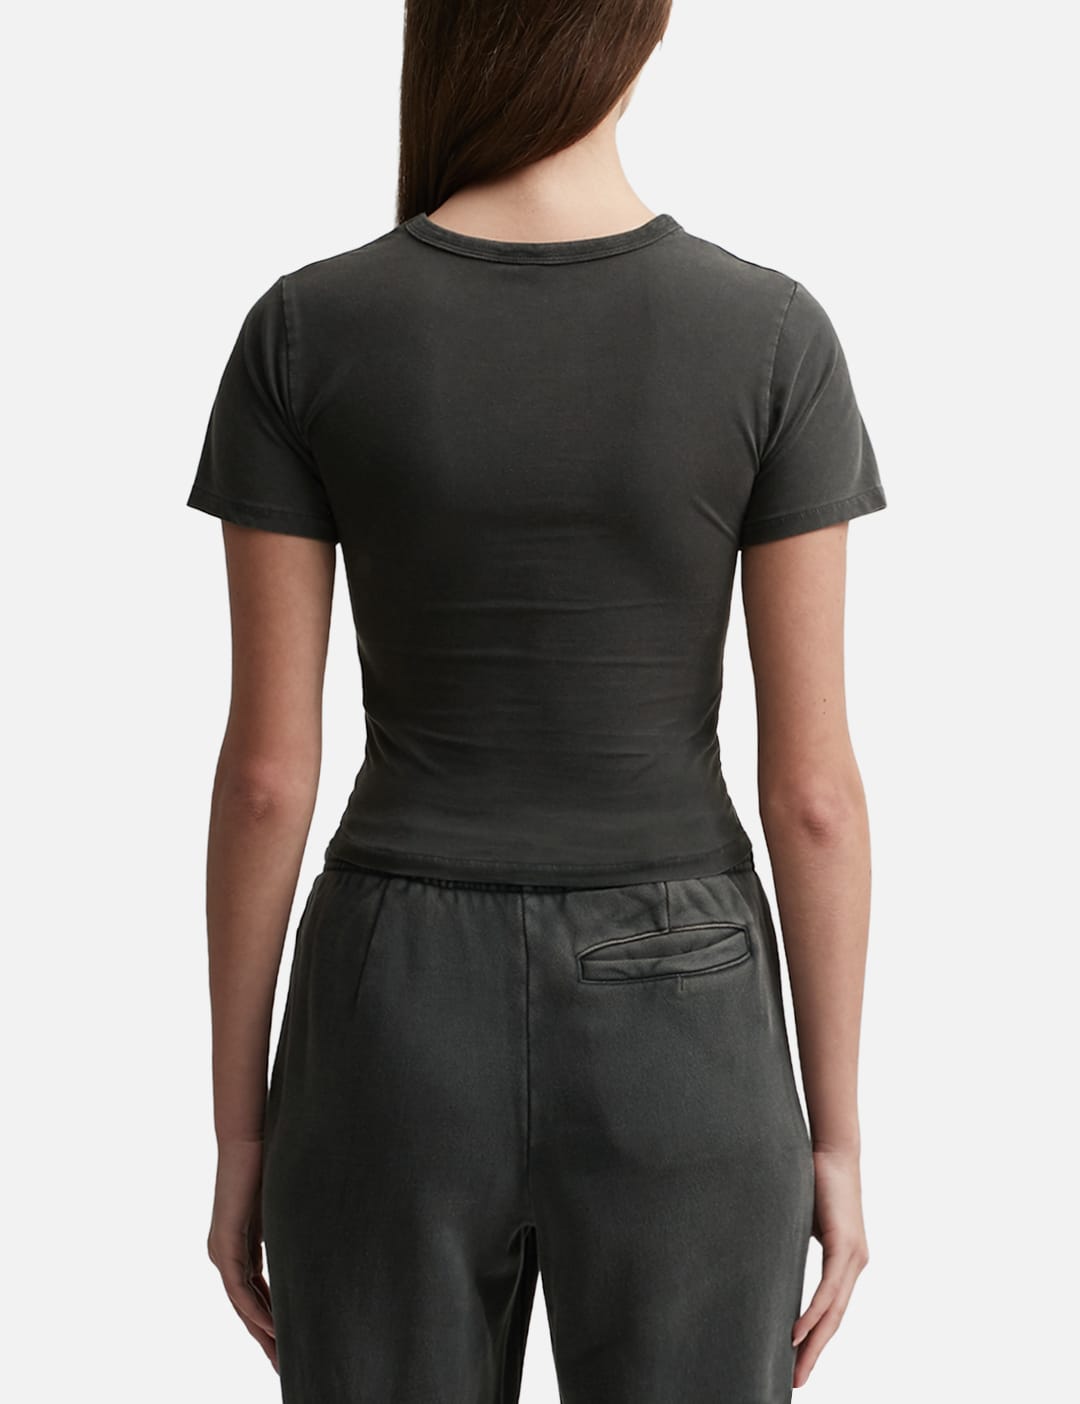 Entire Studios - Micro T-shirt | HBX - Globally Curated Fashion